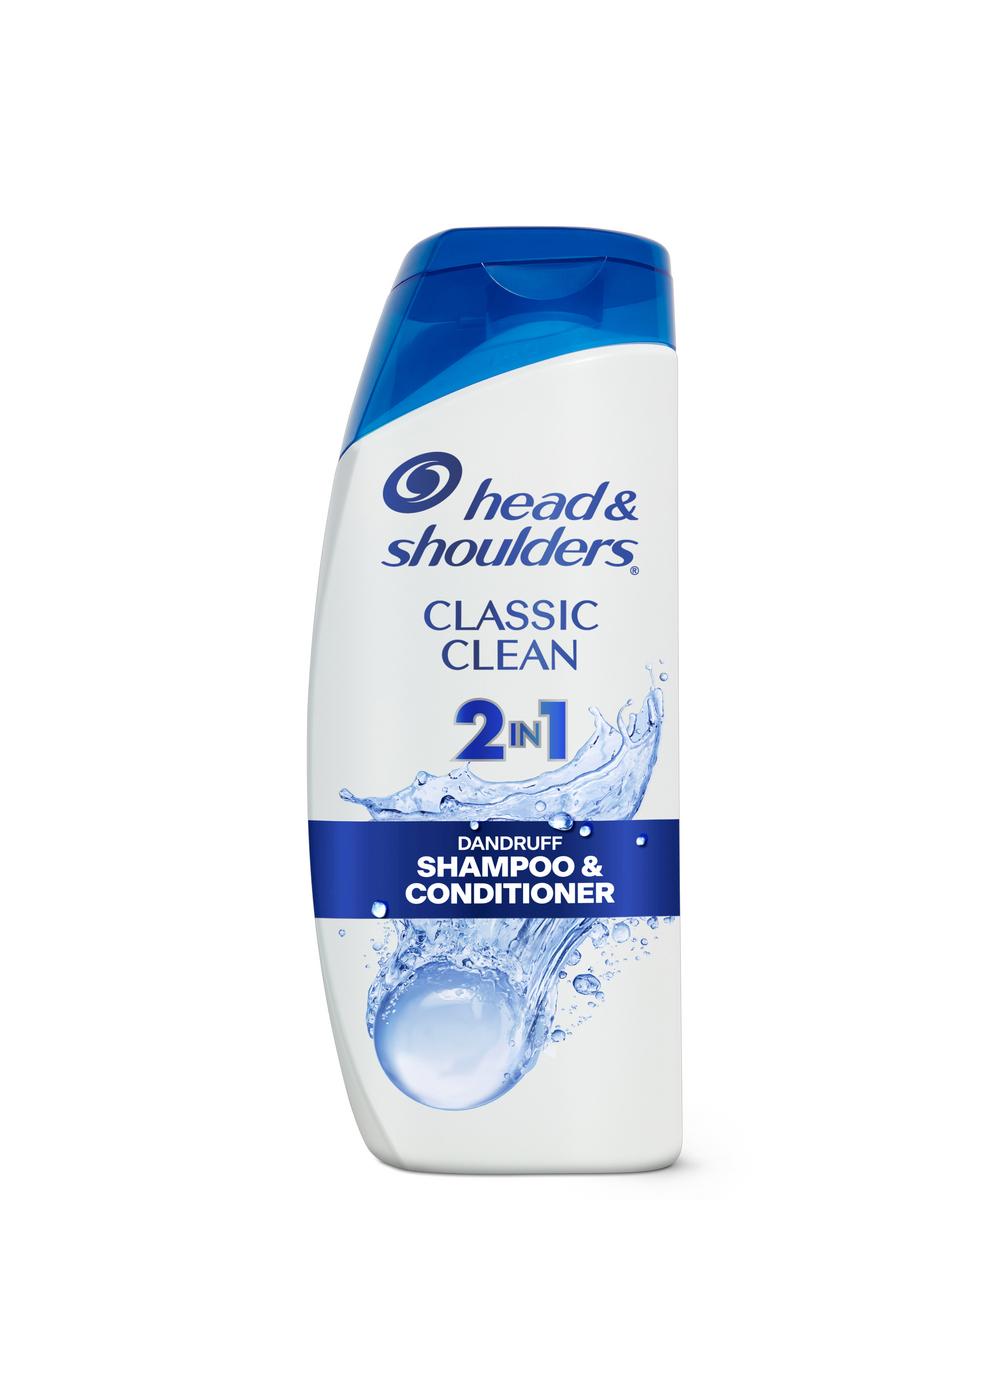 Head & Shoulders 2 in 1 Dandruff Shampoo + Conditioner - Classic Clean; image 5 of 11